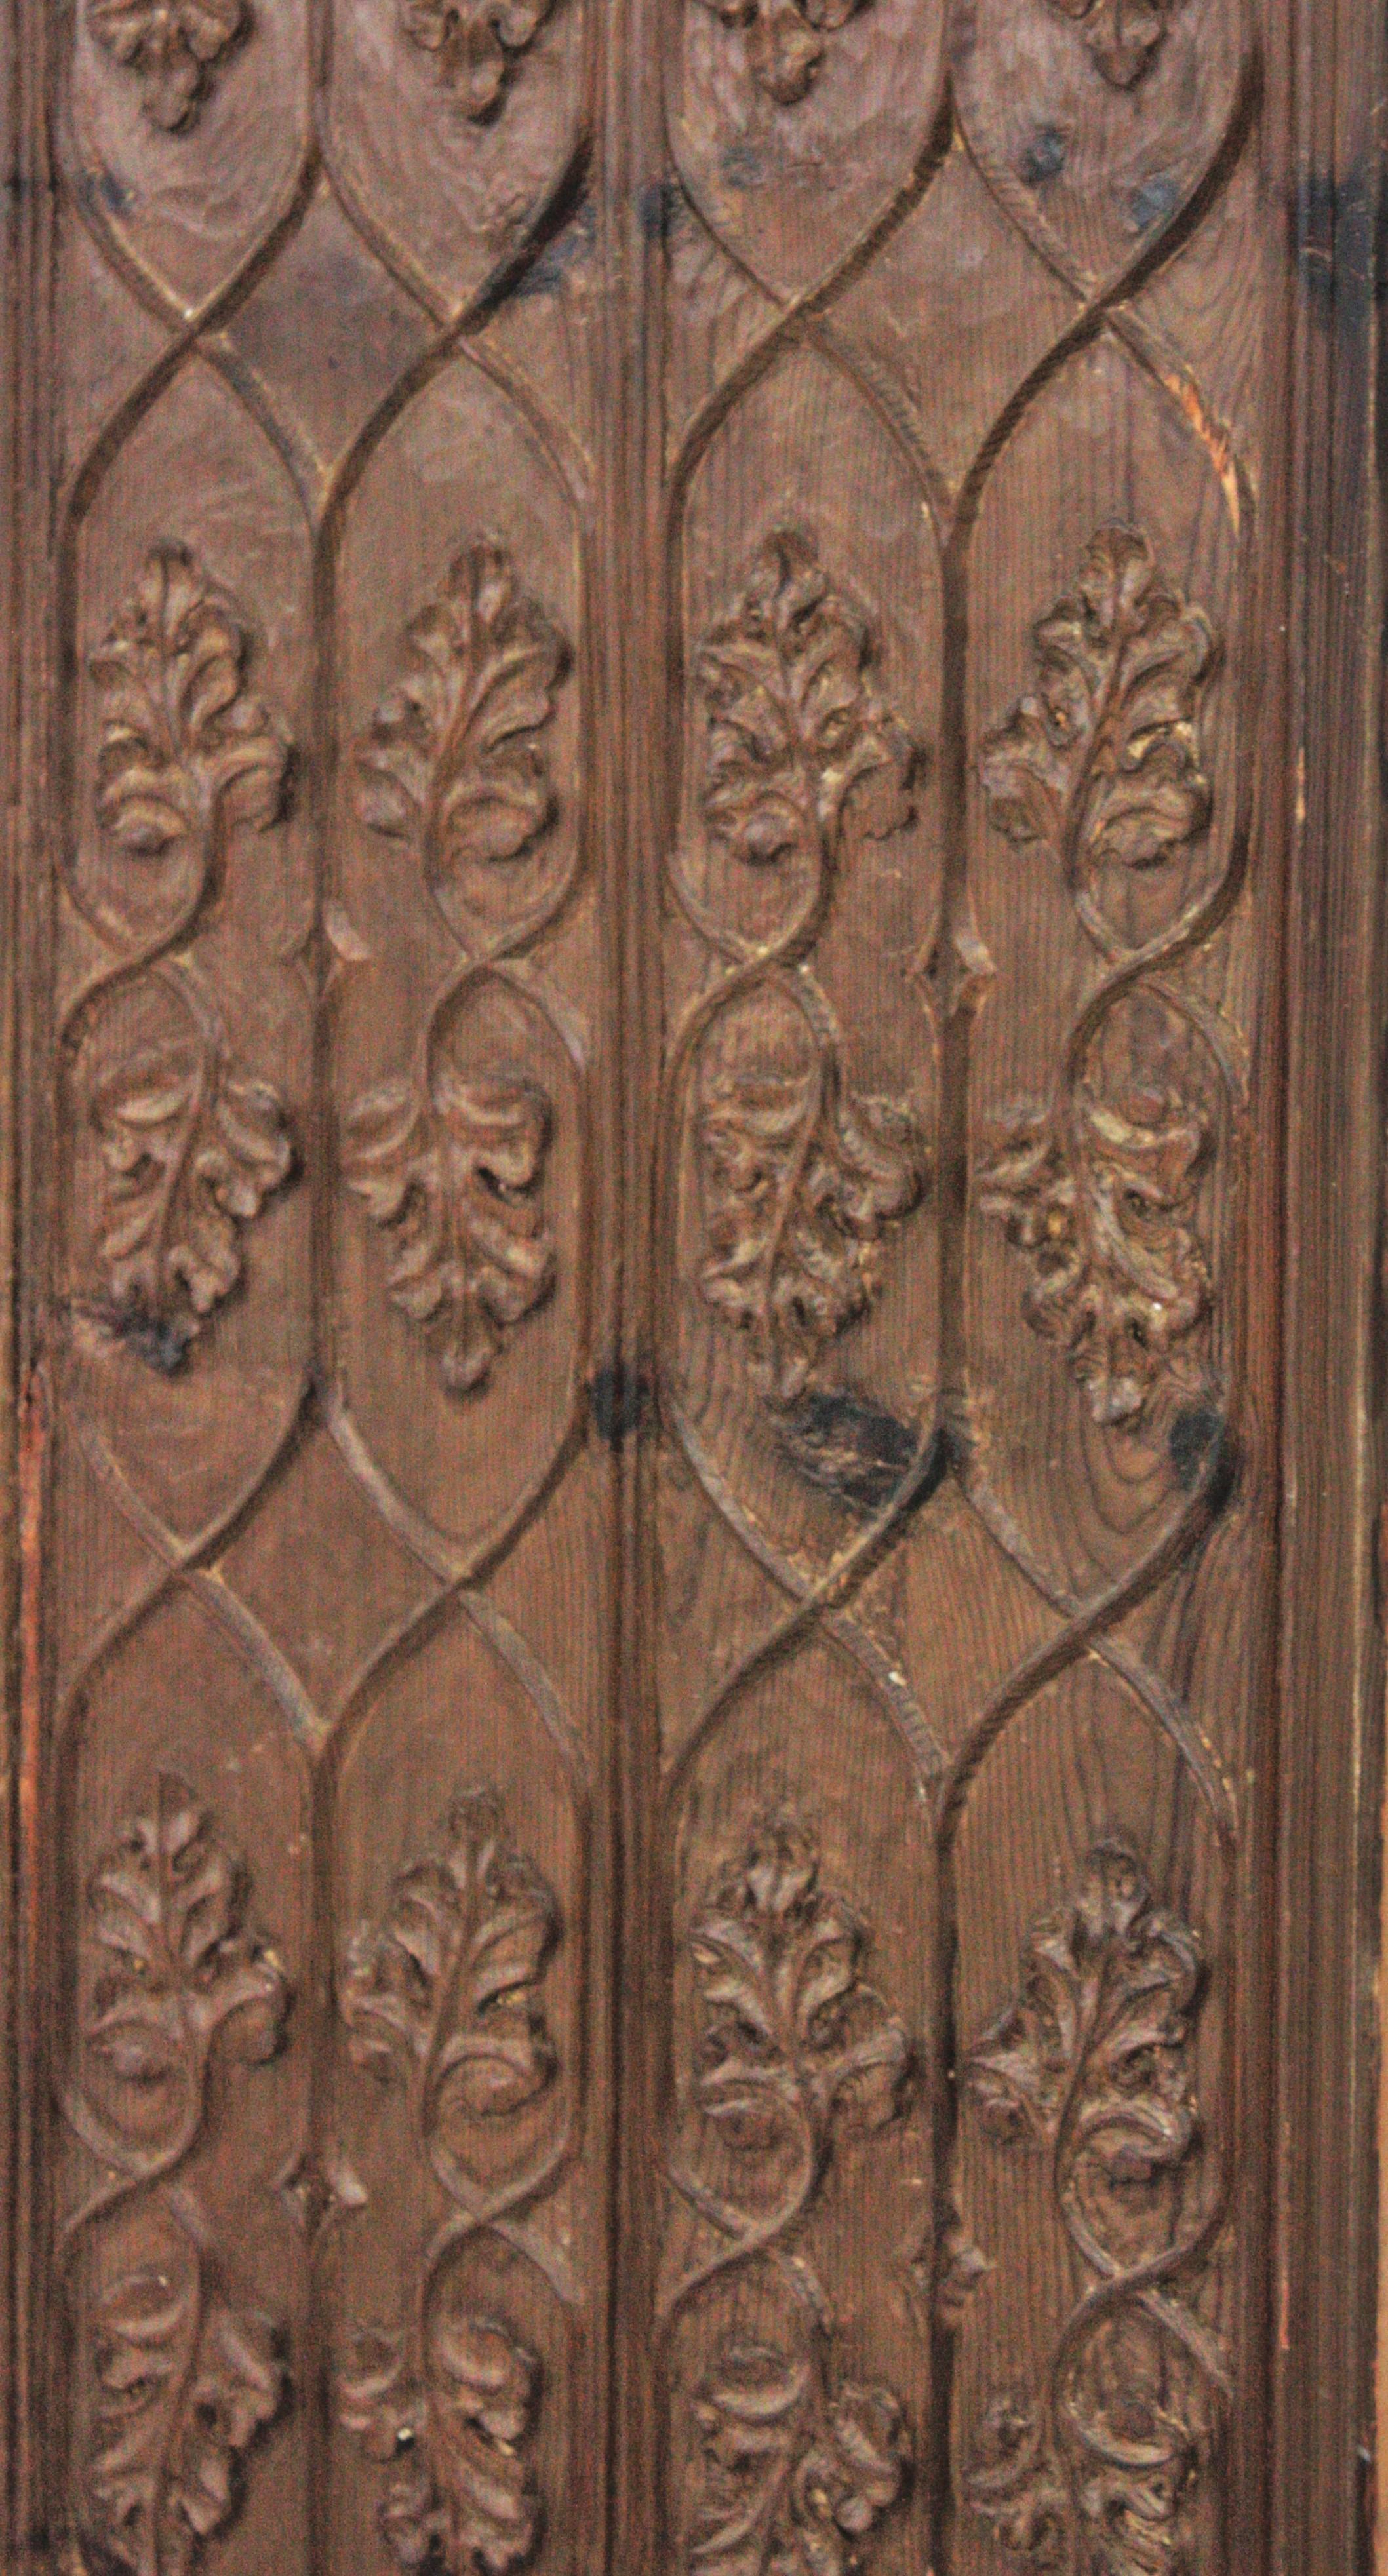 Spanish Hand-Carved Walnut Wood Decorative Wall Panel with Foliage Motifs For Sale 7